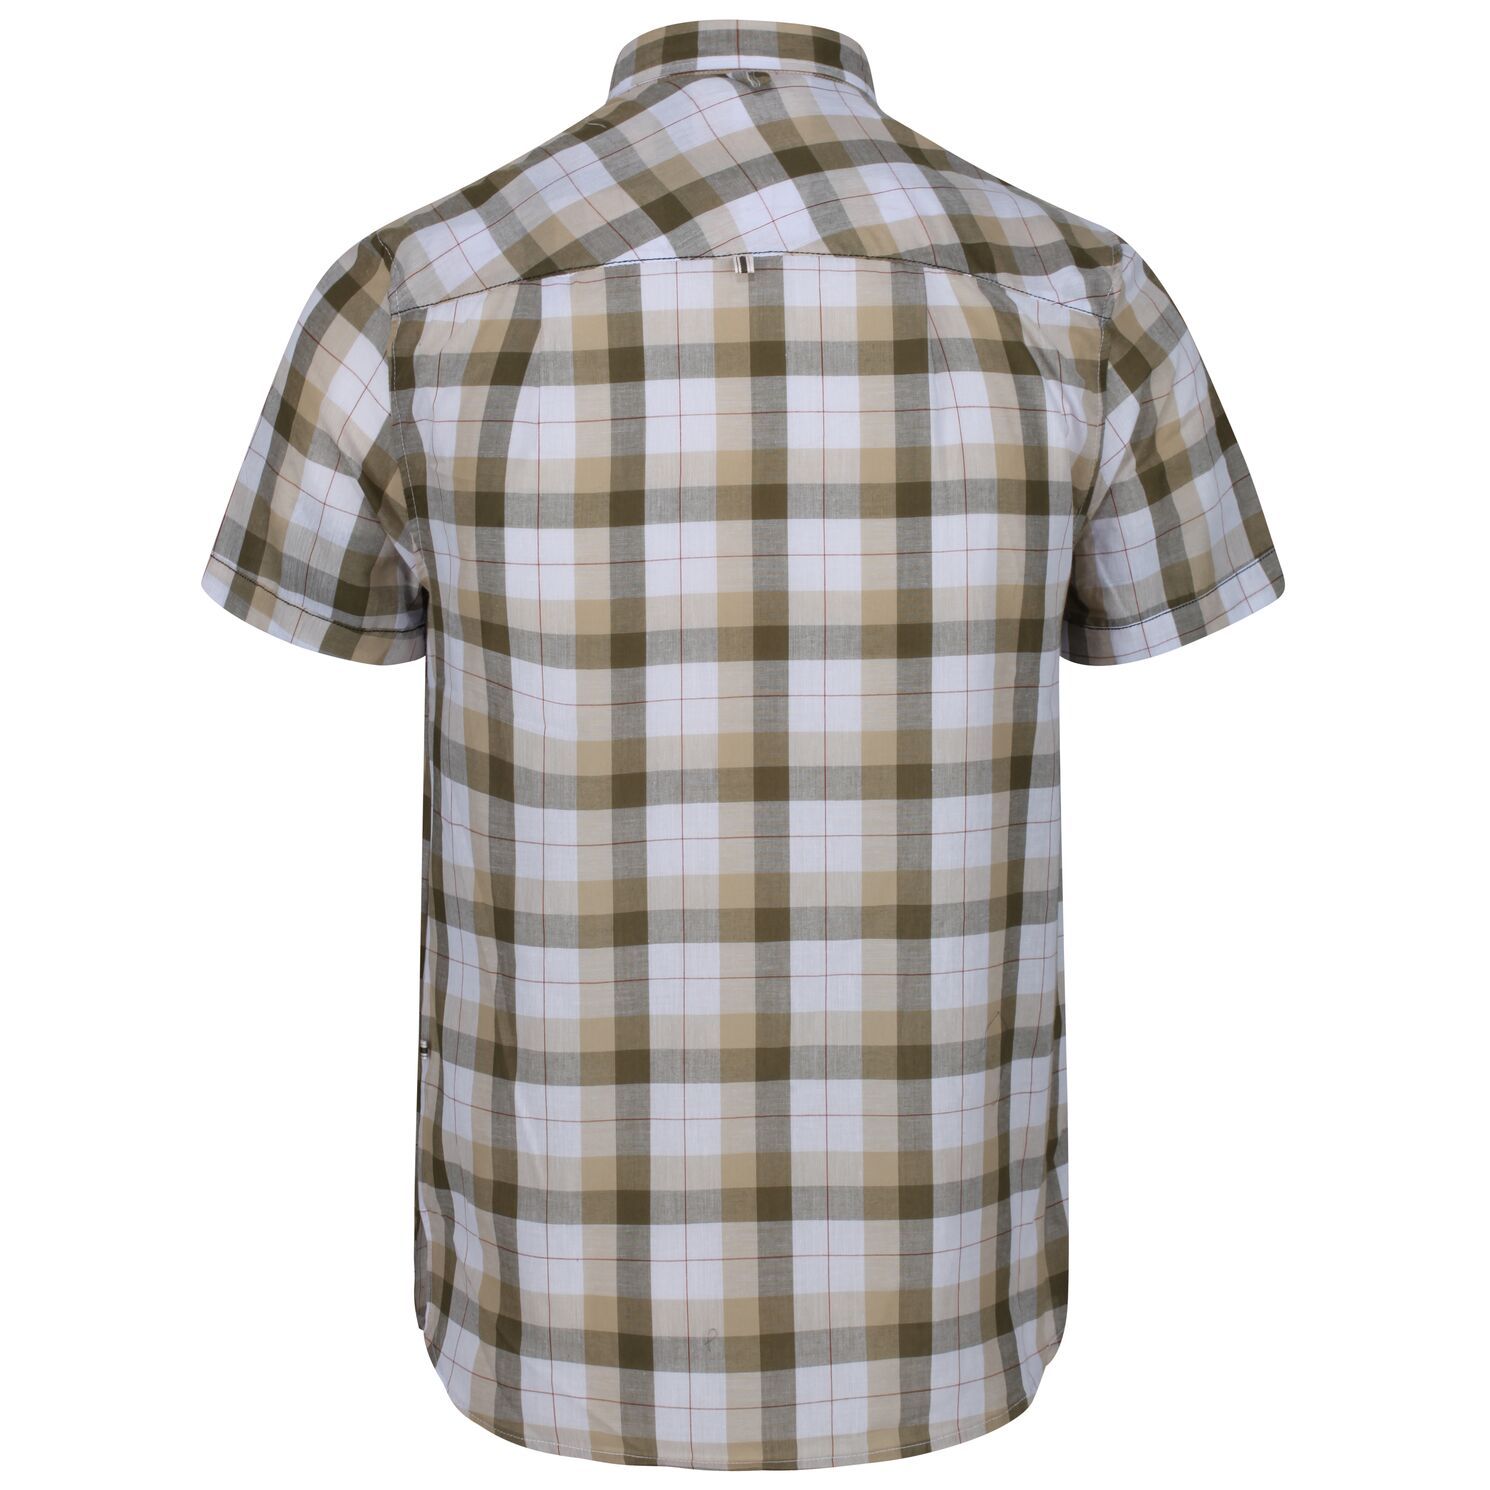 Material: 55% cotton, 45% polyester. Coolweave  organic cotton/polyester check fabric. Cut with a curved hem. Button fasten chest pocket. Environmentally friendly. Chest sizes to fit: (S): 94-96.5cm, (M): 99-101.5cm, (L): 104-106.5cm, (XL): 109-112cm, (XXL): 117-122cm, (3XL): 124.5-129.5cm.